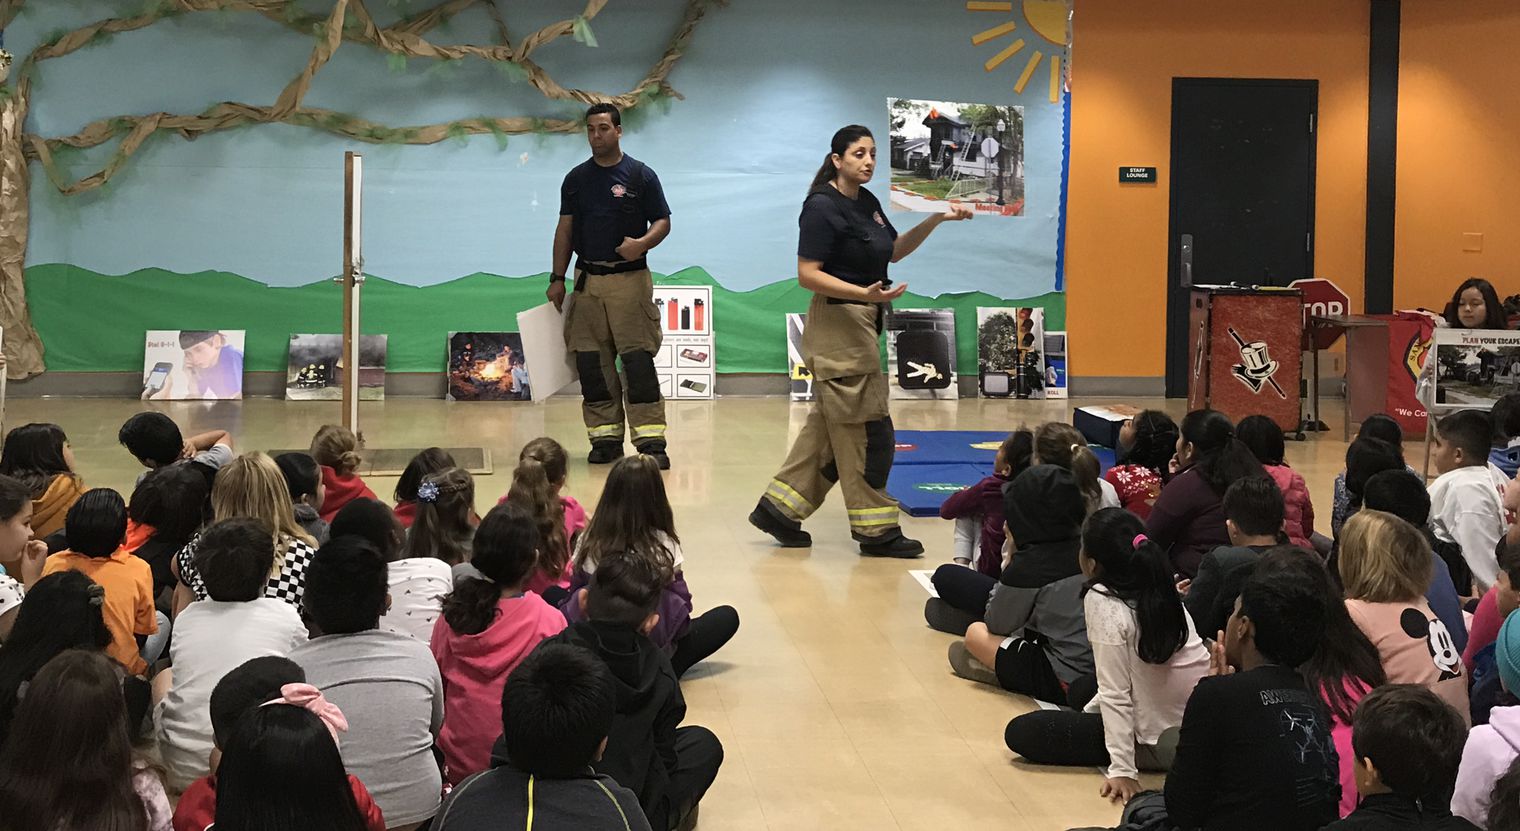 Firefighters putting on an assembly